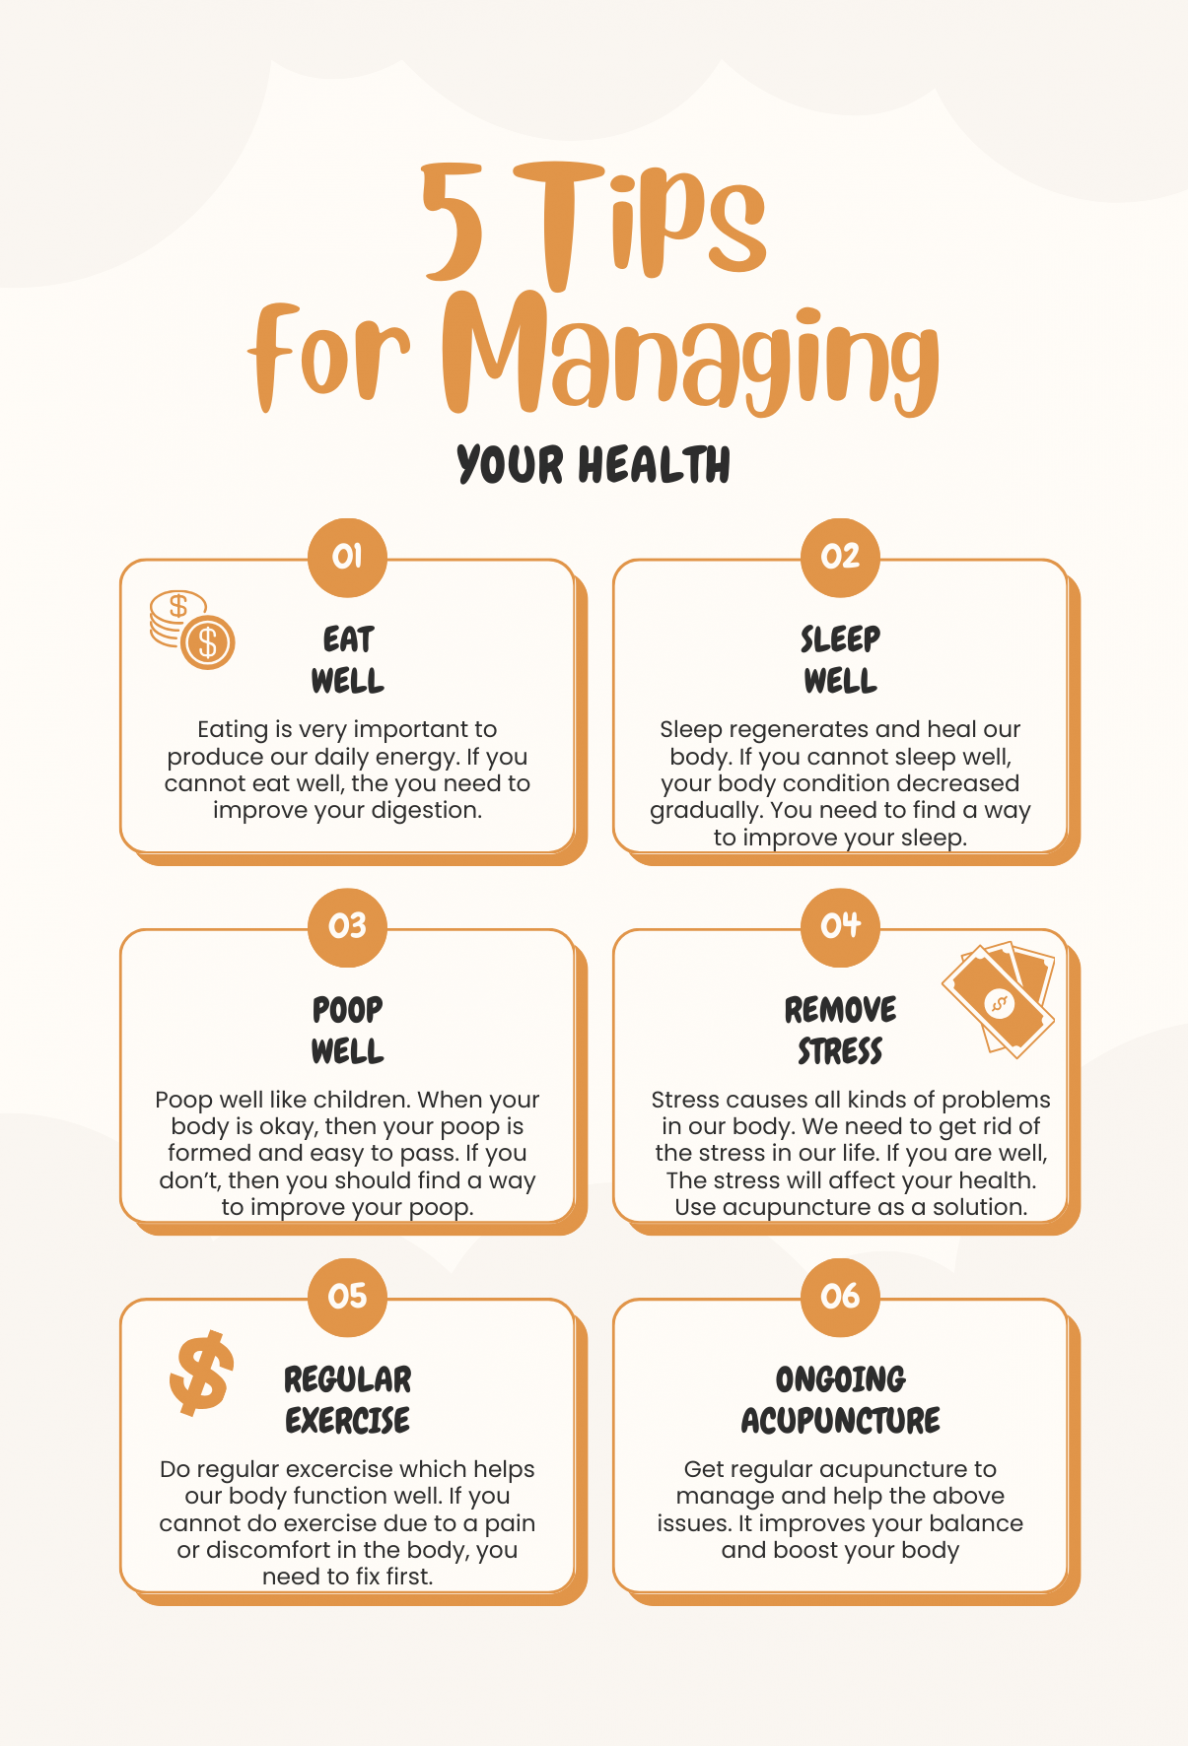 5 Tips for Managing your health